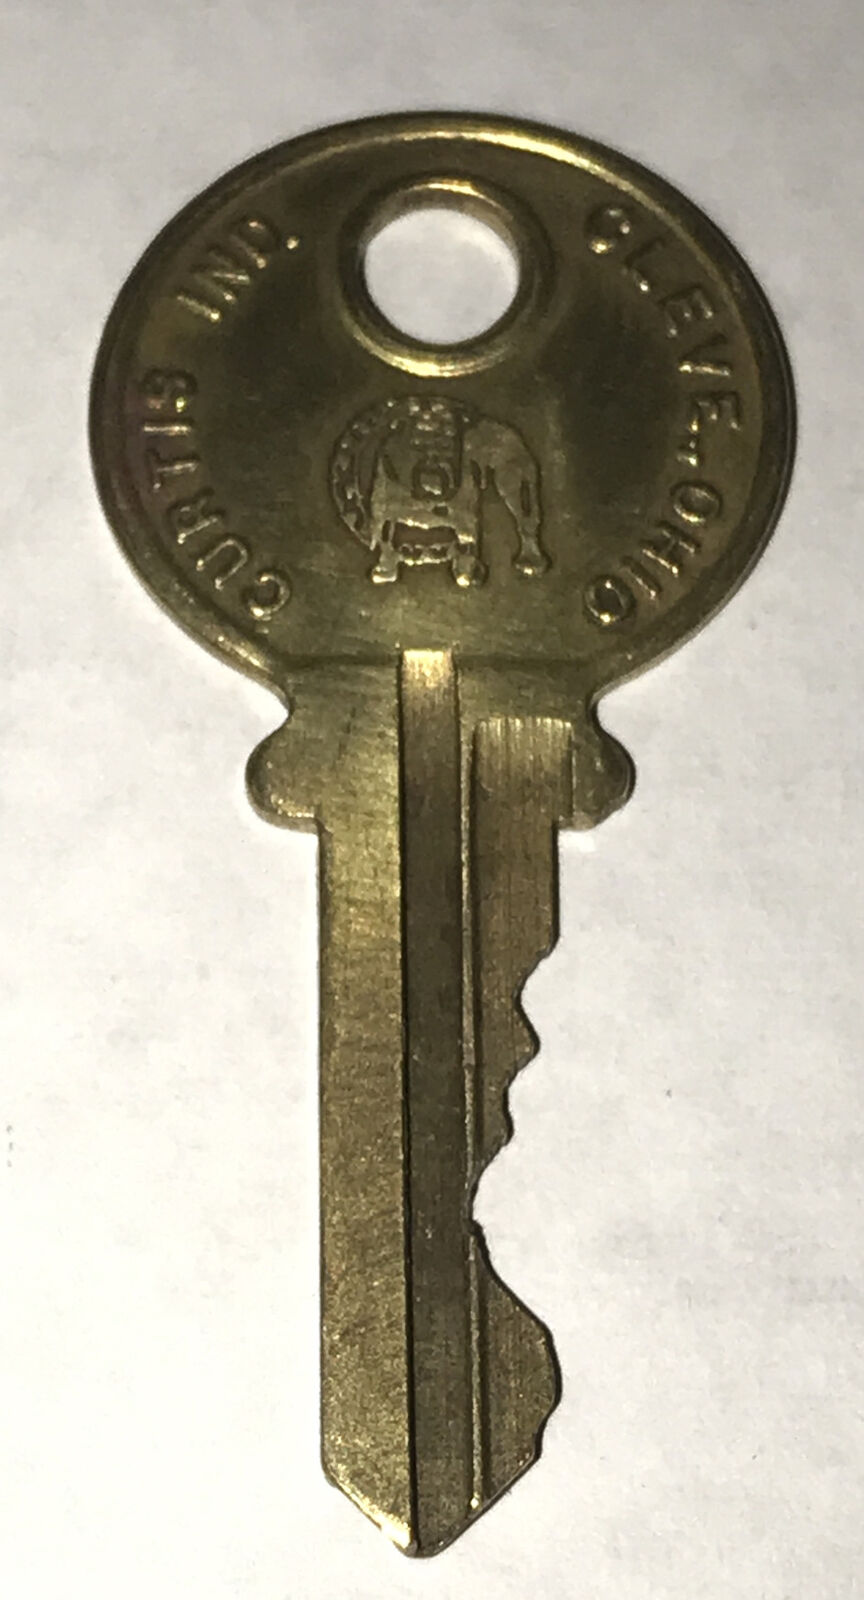 VINTAGE BRASS  CURTIS KEY COMPANY CLEVELAND OHIO IN 1 KEY #IN1 MADE IN USA